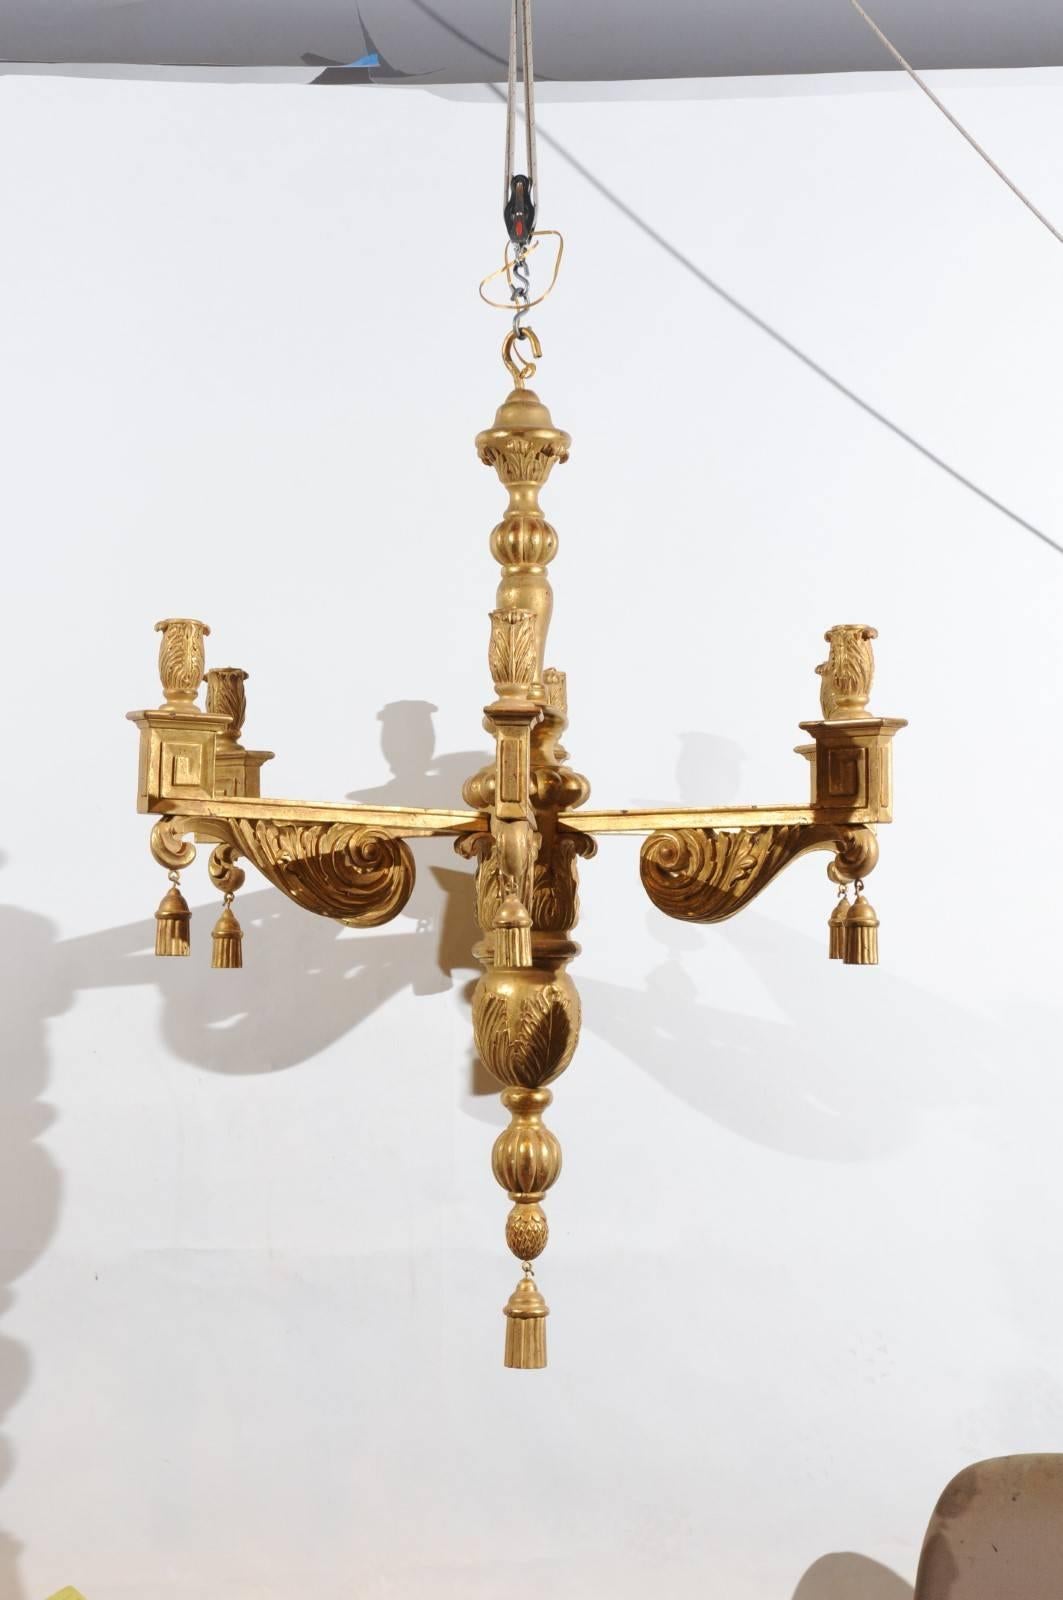 Large Giltwood Neoclassical Chandelier with Tassels & 6 Lights In Good Condition For Sale In Atlanta, GA